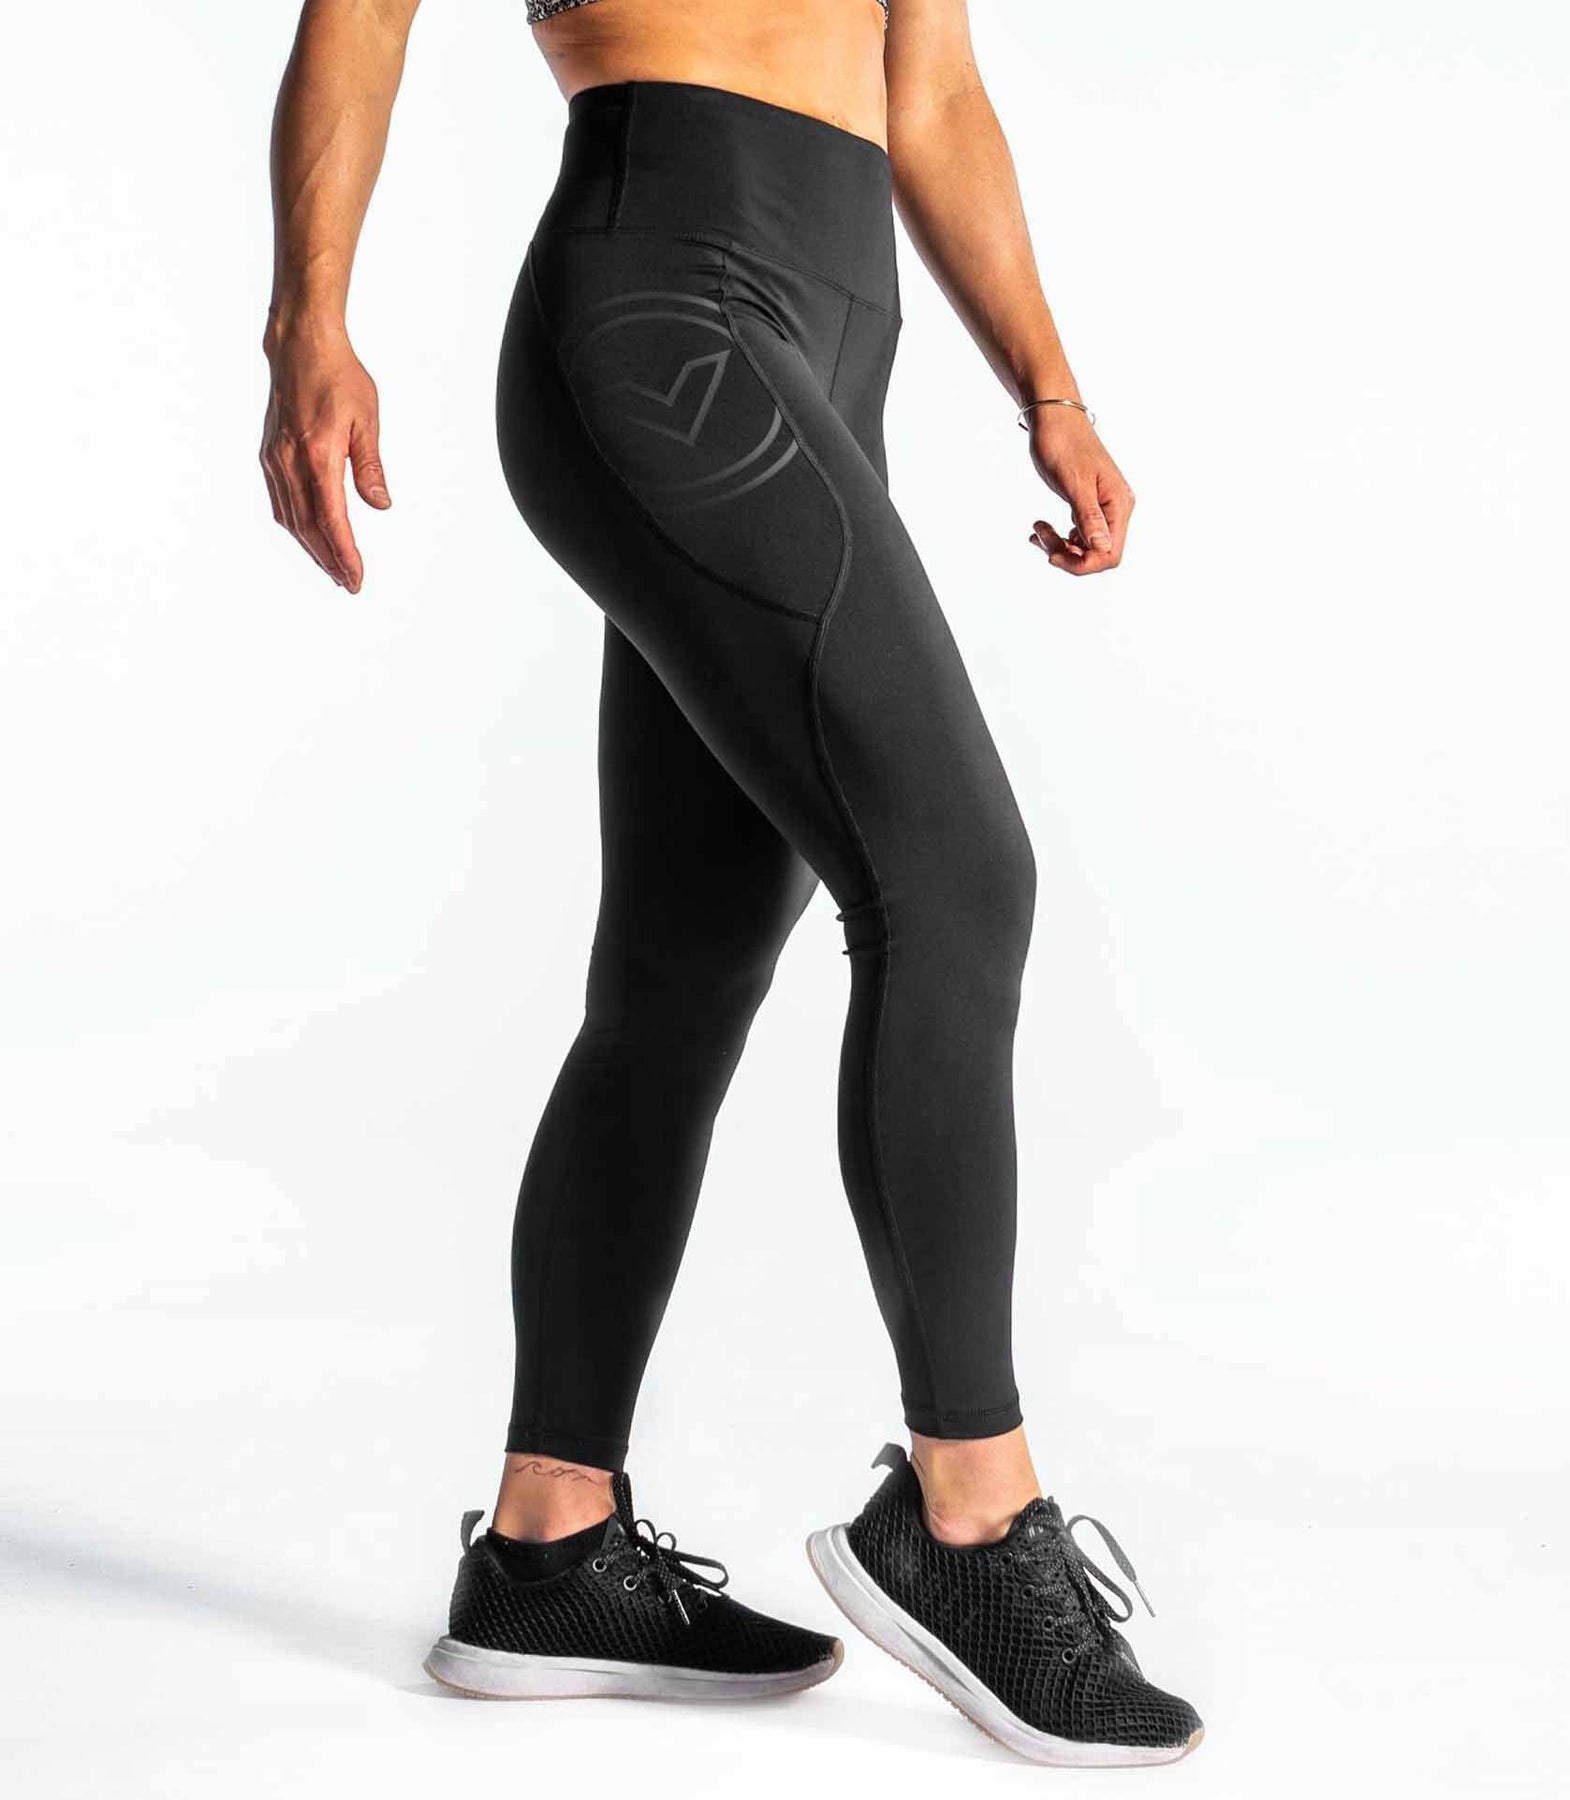 Buy Virus Women's Stay Cool Eco21.5 Compression Pants - Night